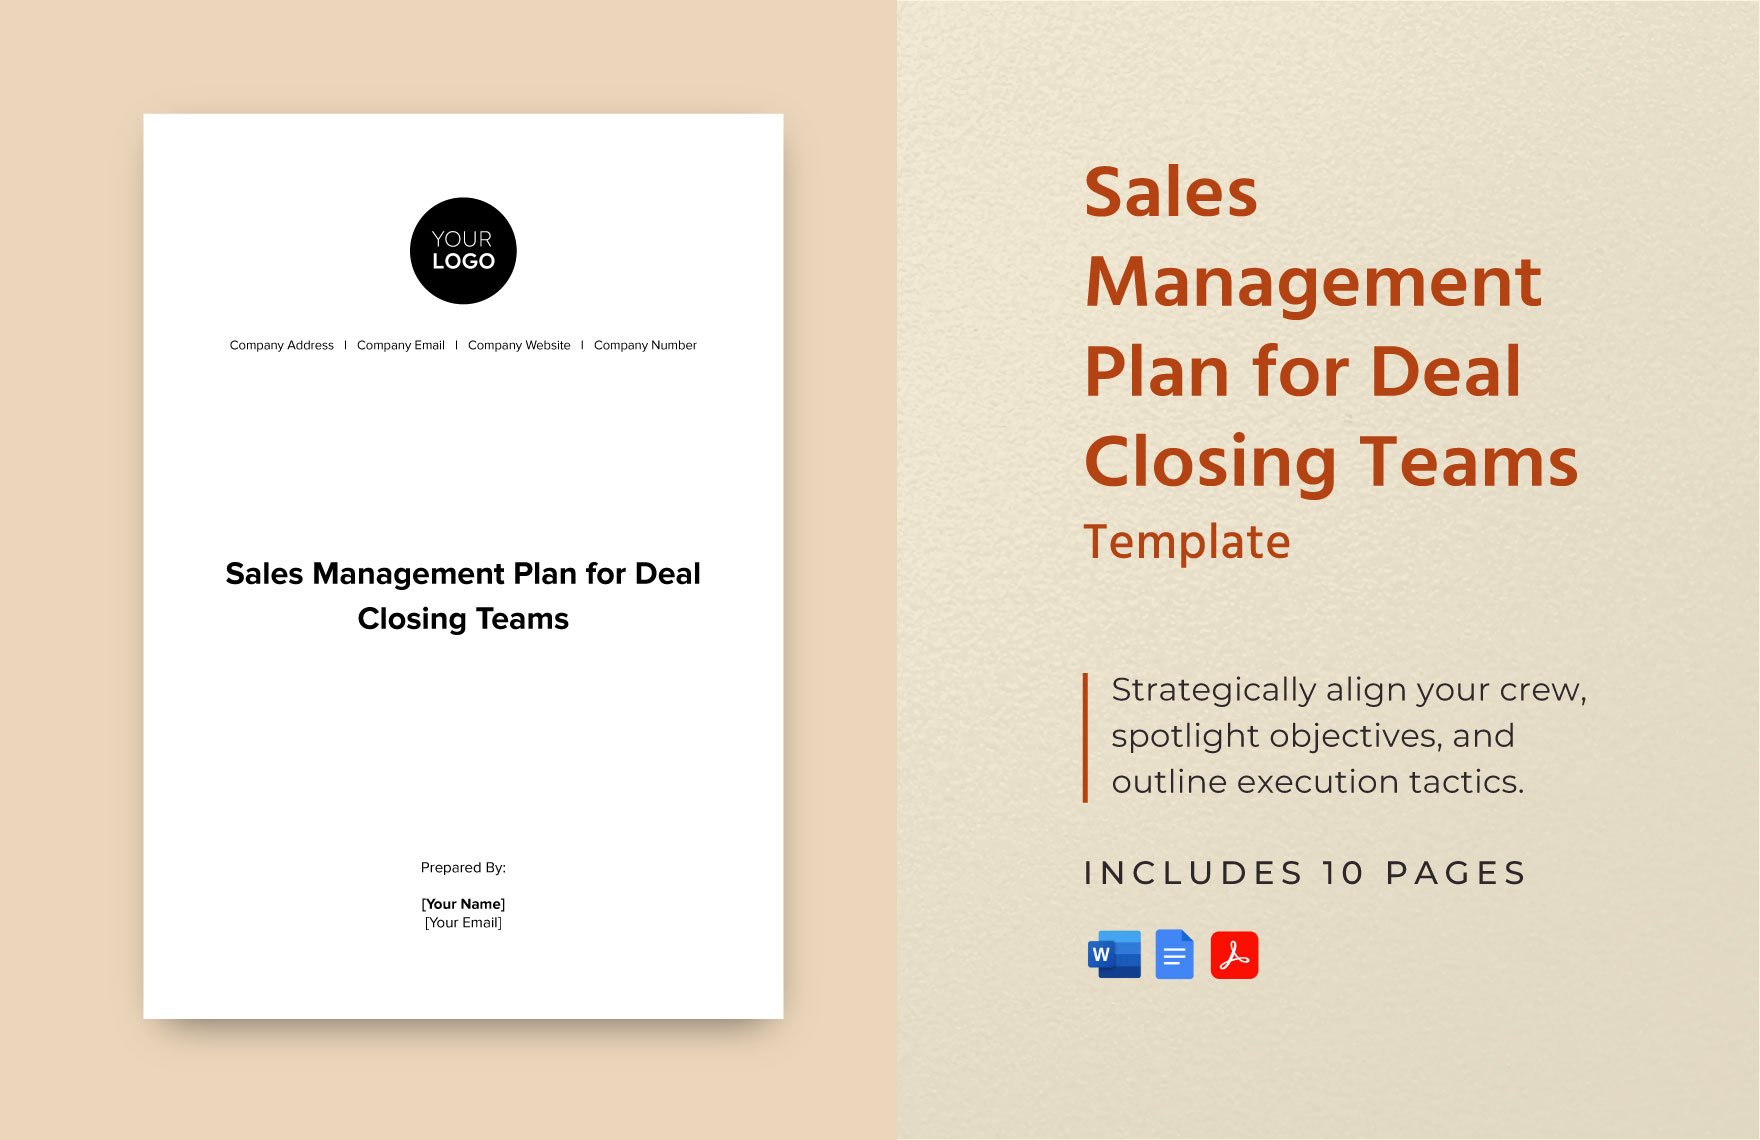 Sales Management Plan for Deal Closing Teams Template